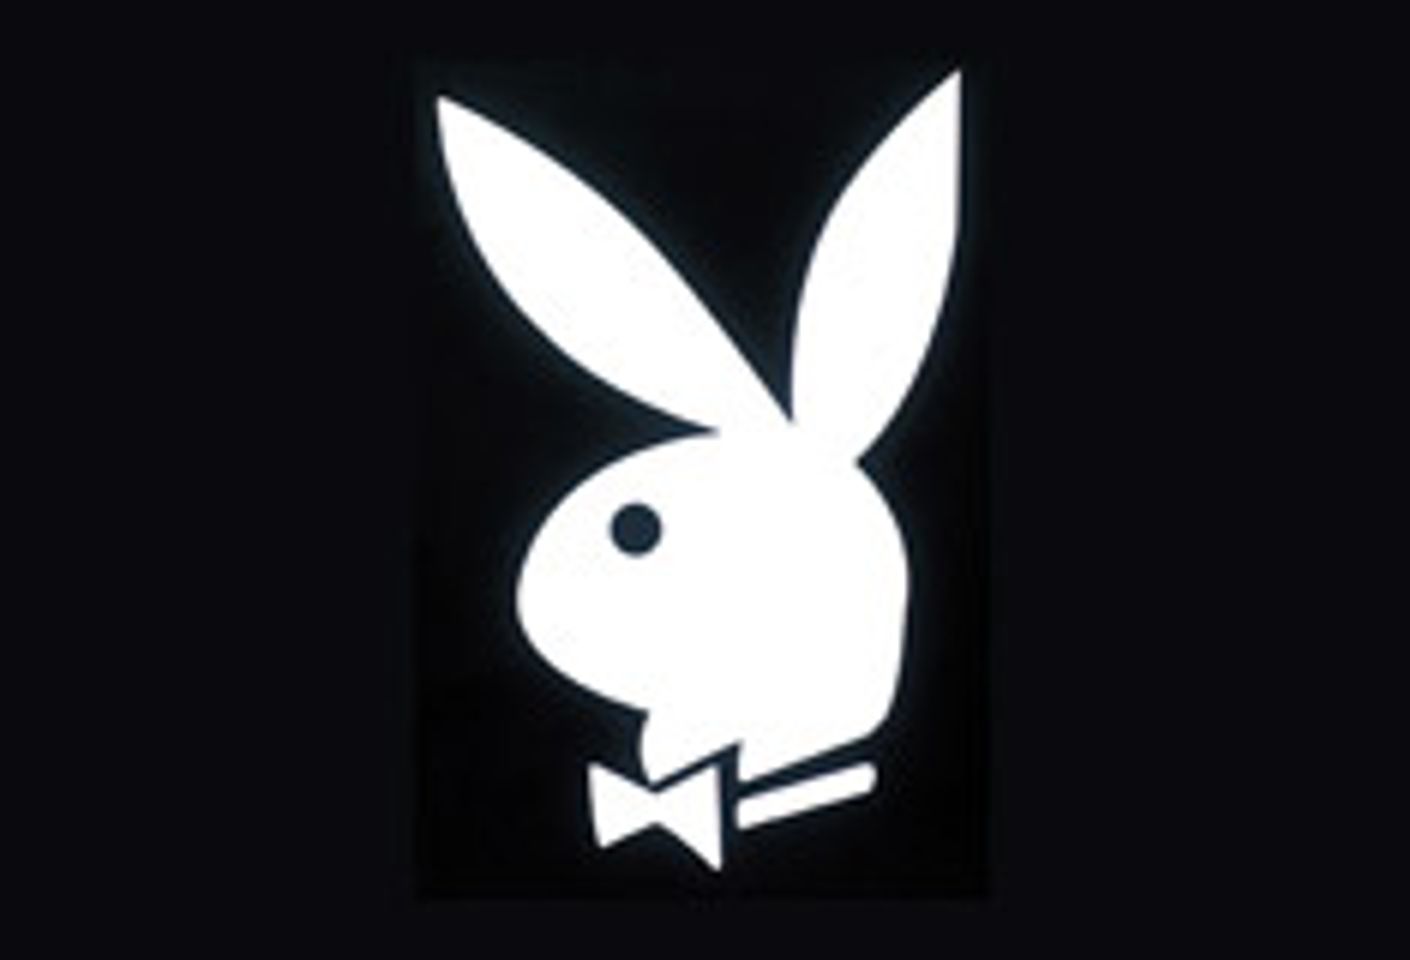 Videogame Network Founder Joins Playboy Board